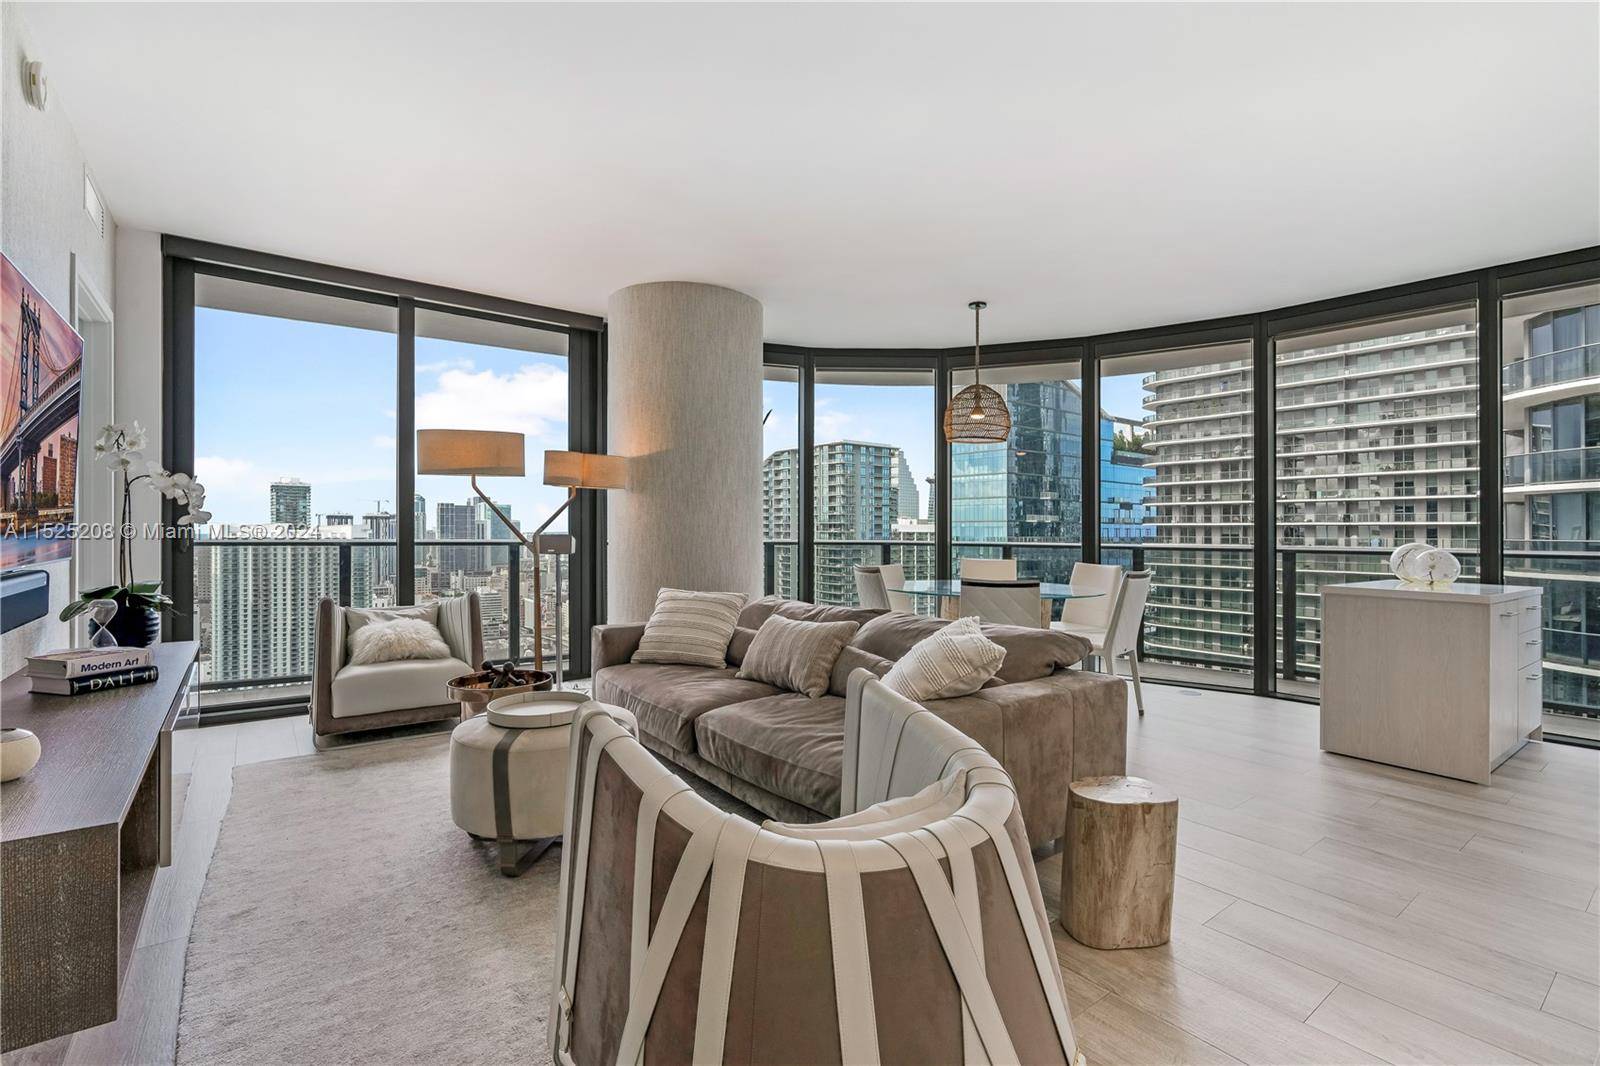 Enjoy both Bay and Miami skyline views from this custom designed, turnkey corner unit offering 3 en suite bedrooms and 3.